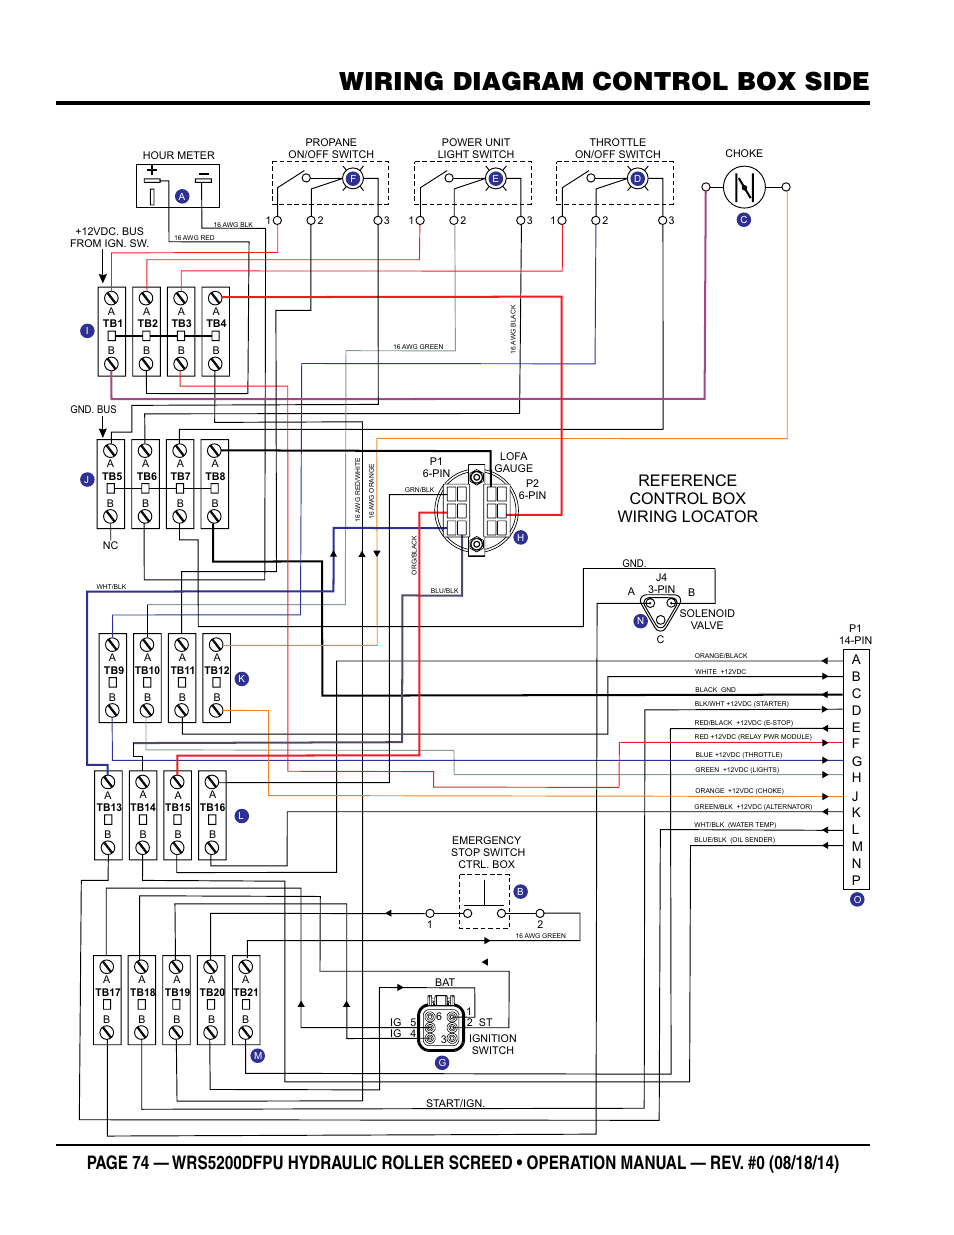 Wiring Diagram Control Box Side  Reference Control Box